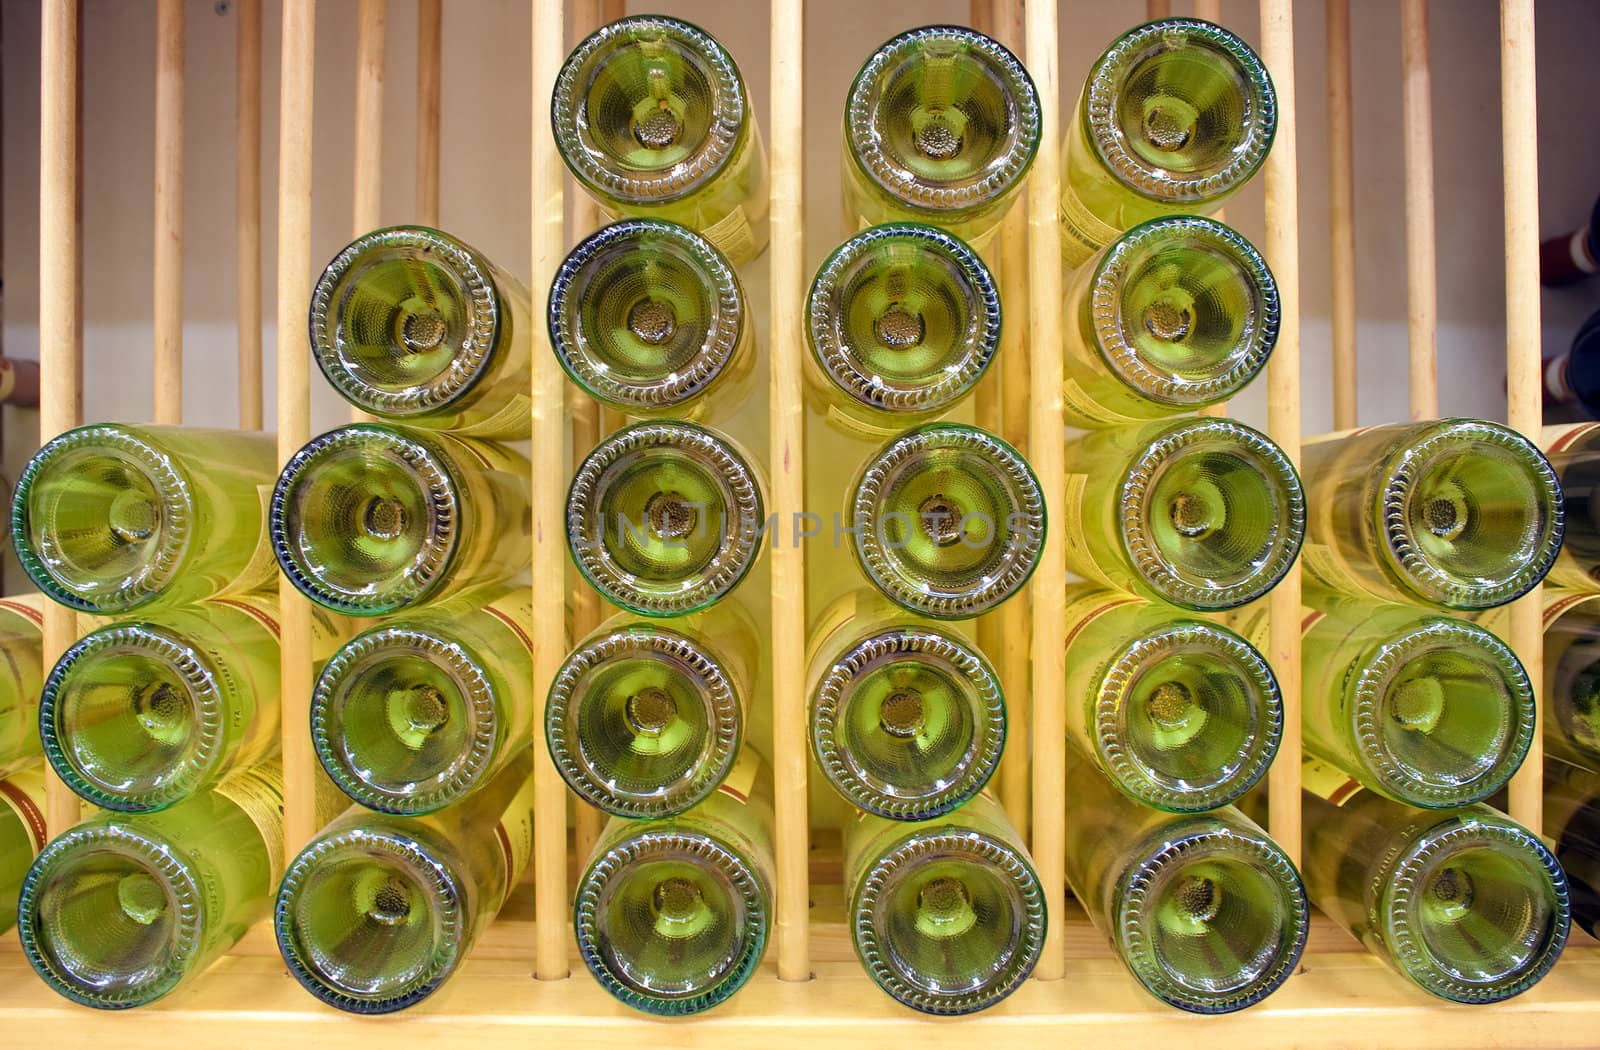 White wine bottles stacked on top of each other with narrow depth of field